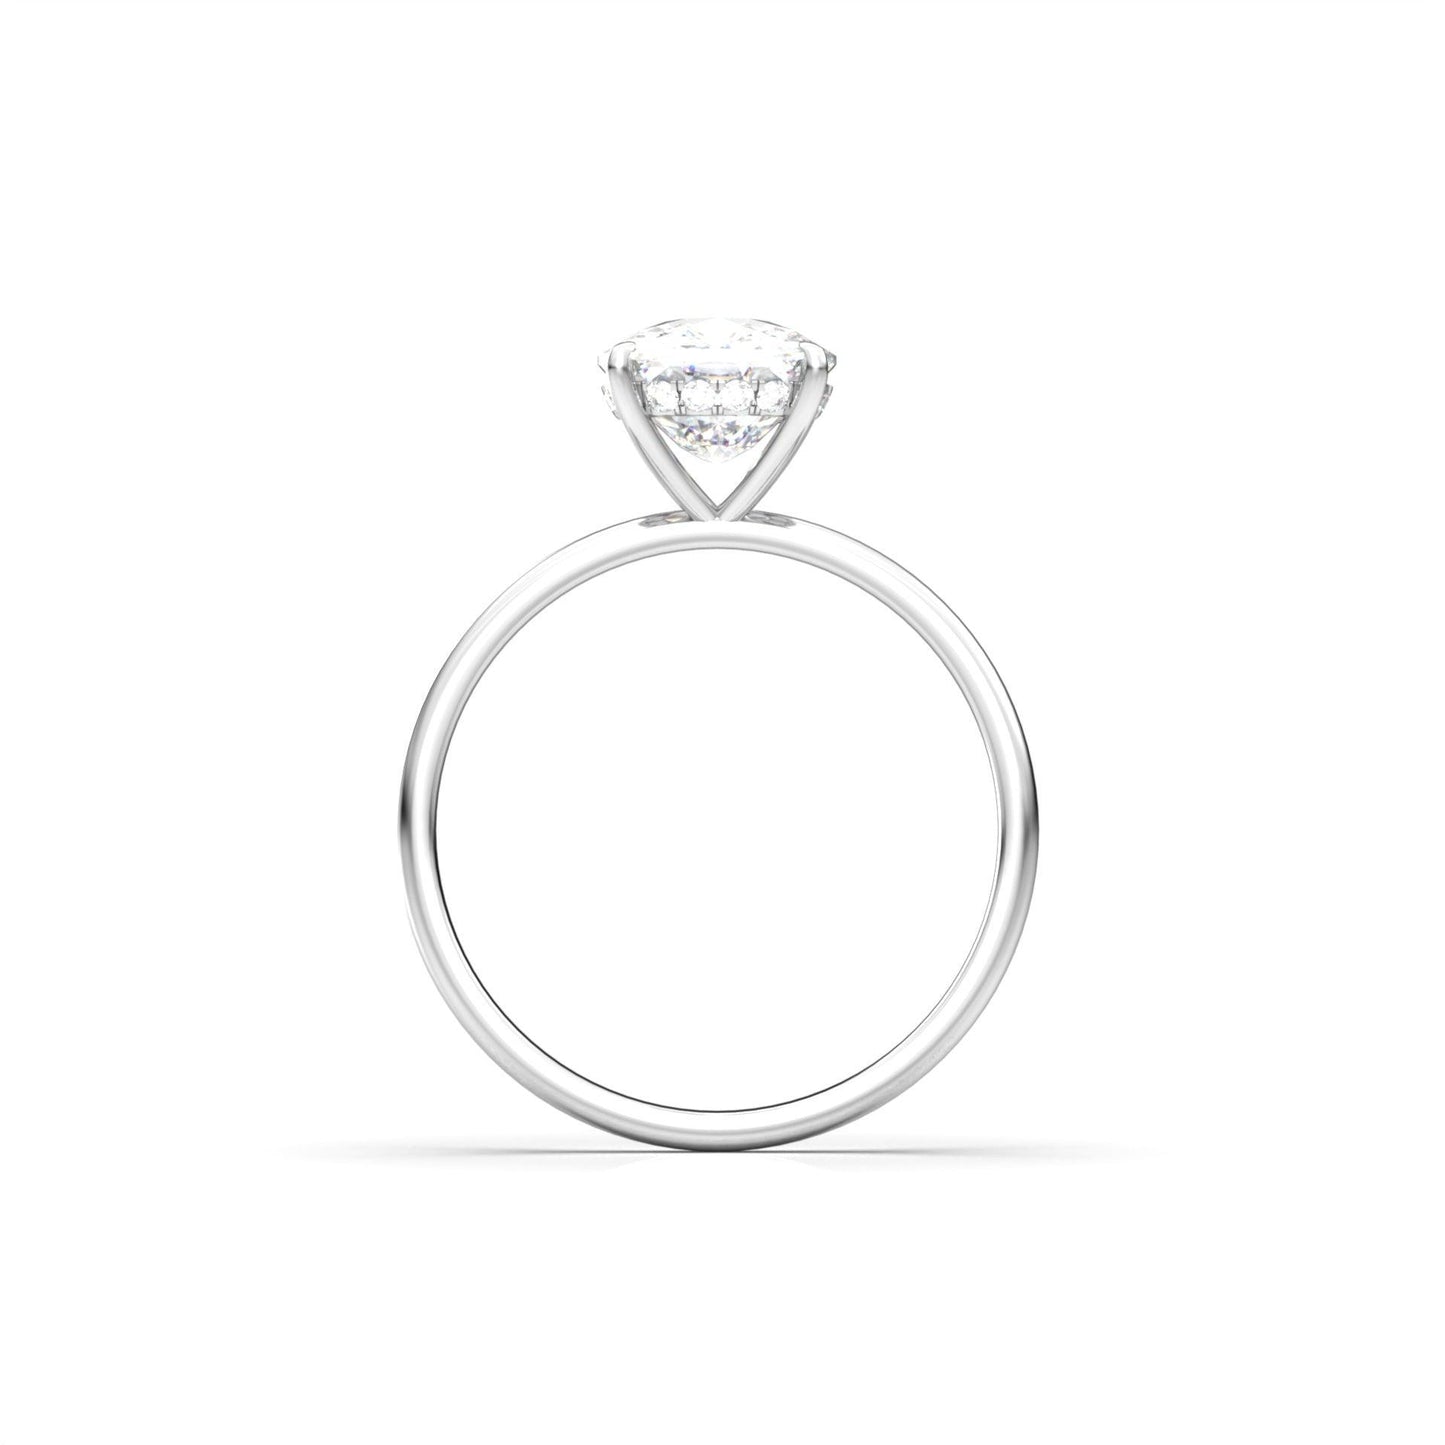 Elongated Cushion Cut Solitaire 4 Claw Moissanite Engagement Ring - moissaniteengagementrings